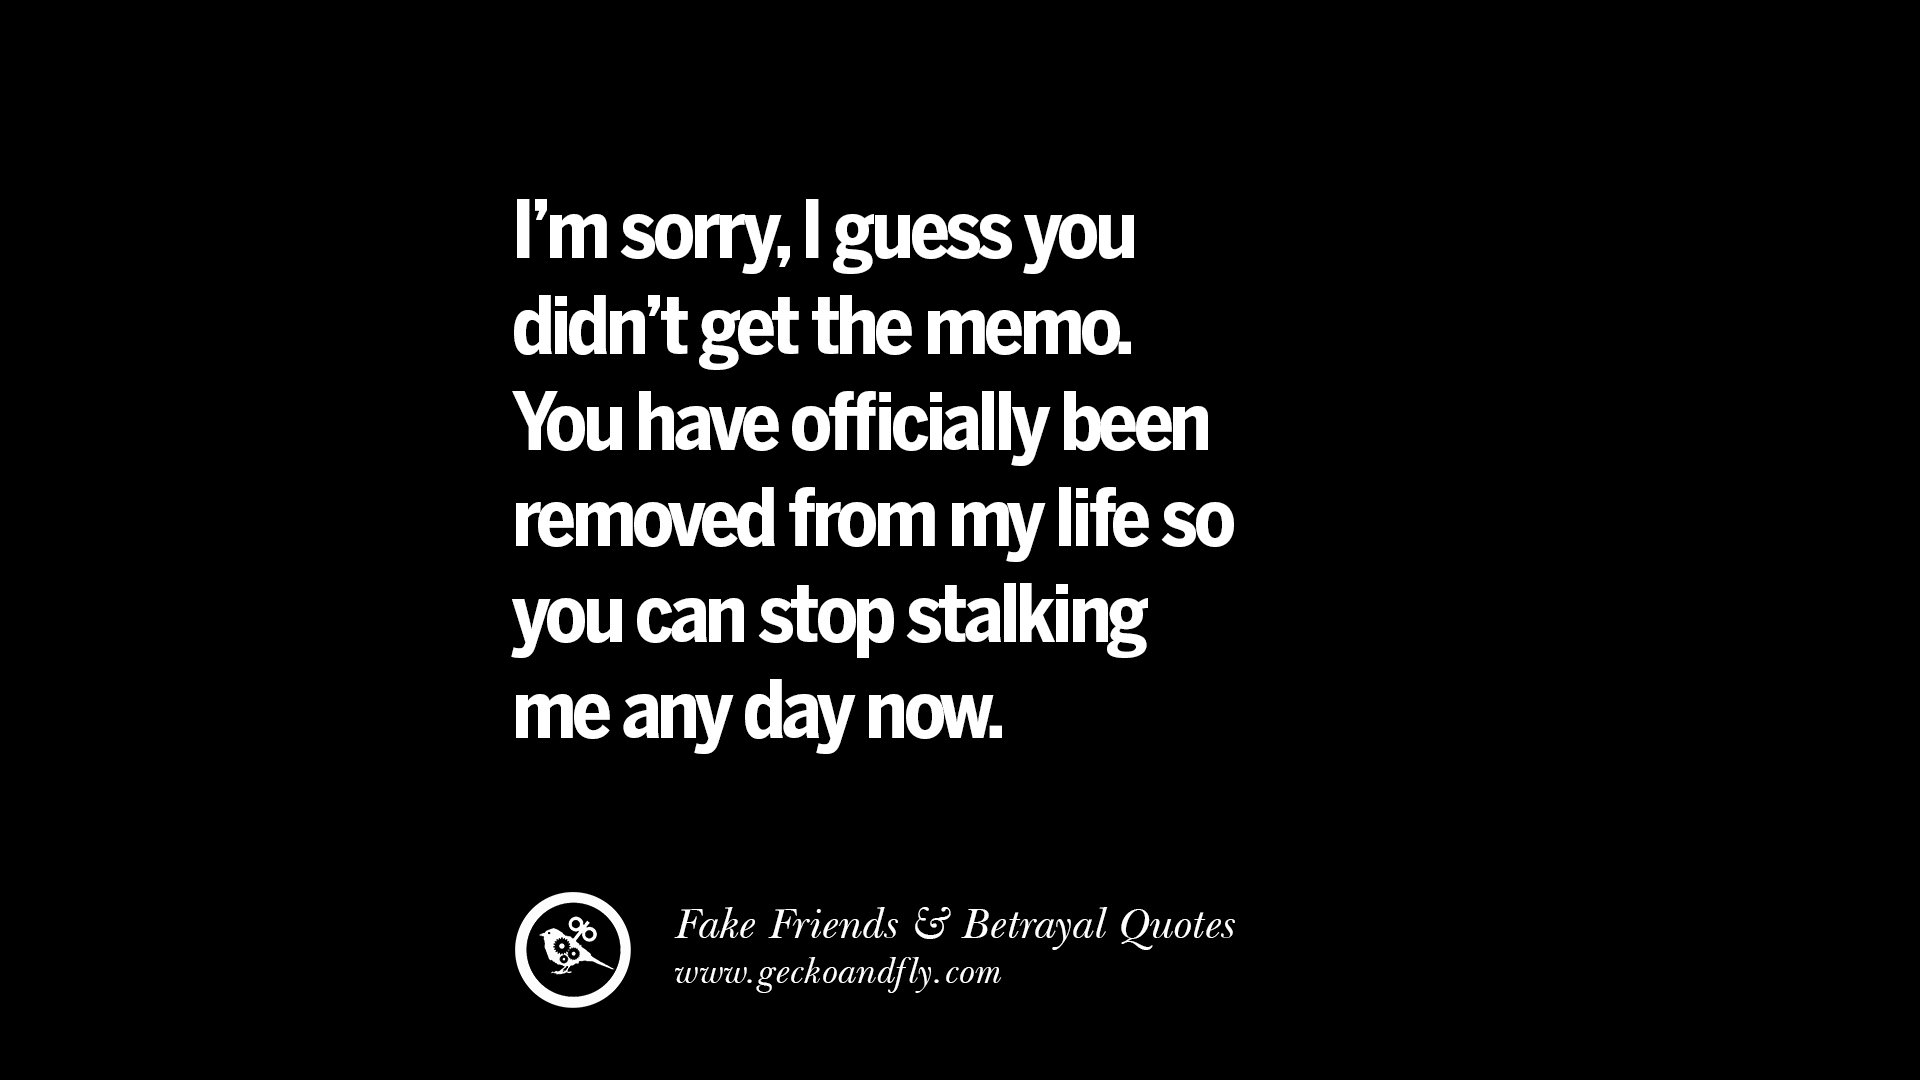 Funny Quotes About False Friends Quotes on fake friends that back stabbed and betrayed you